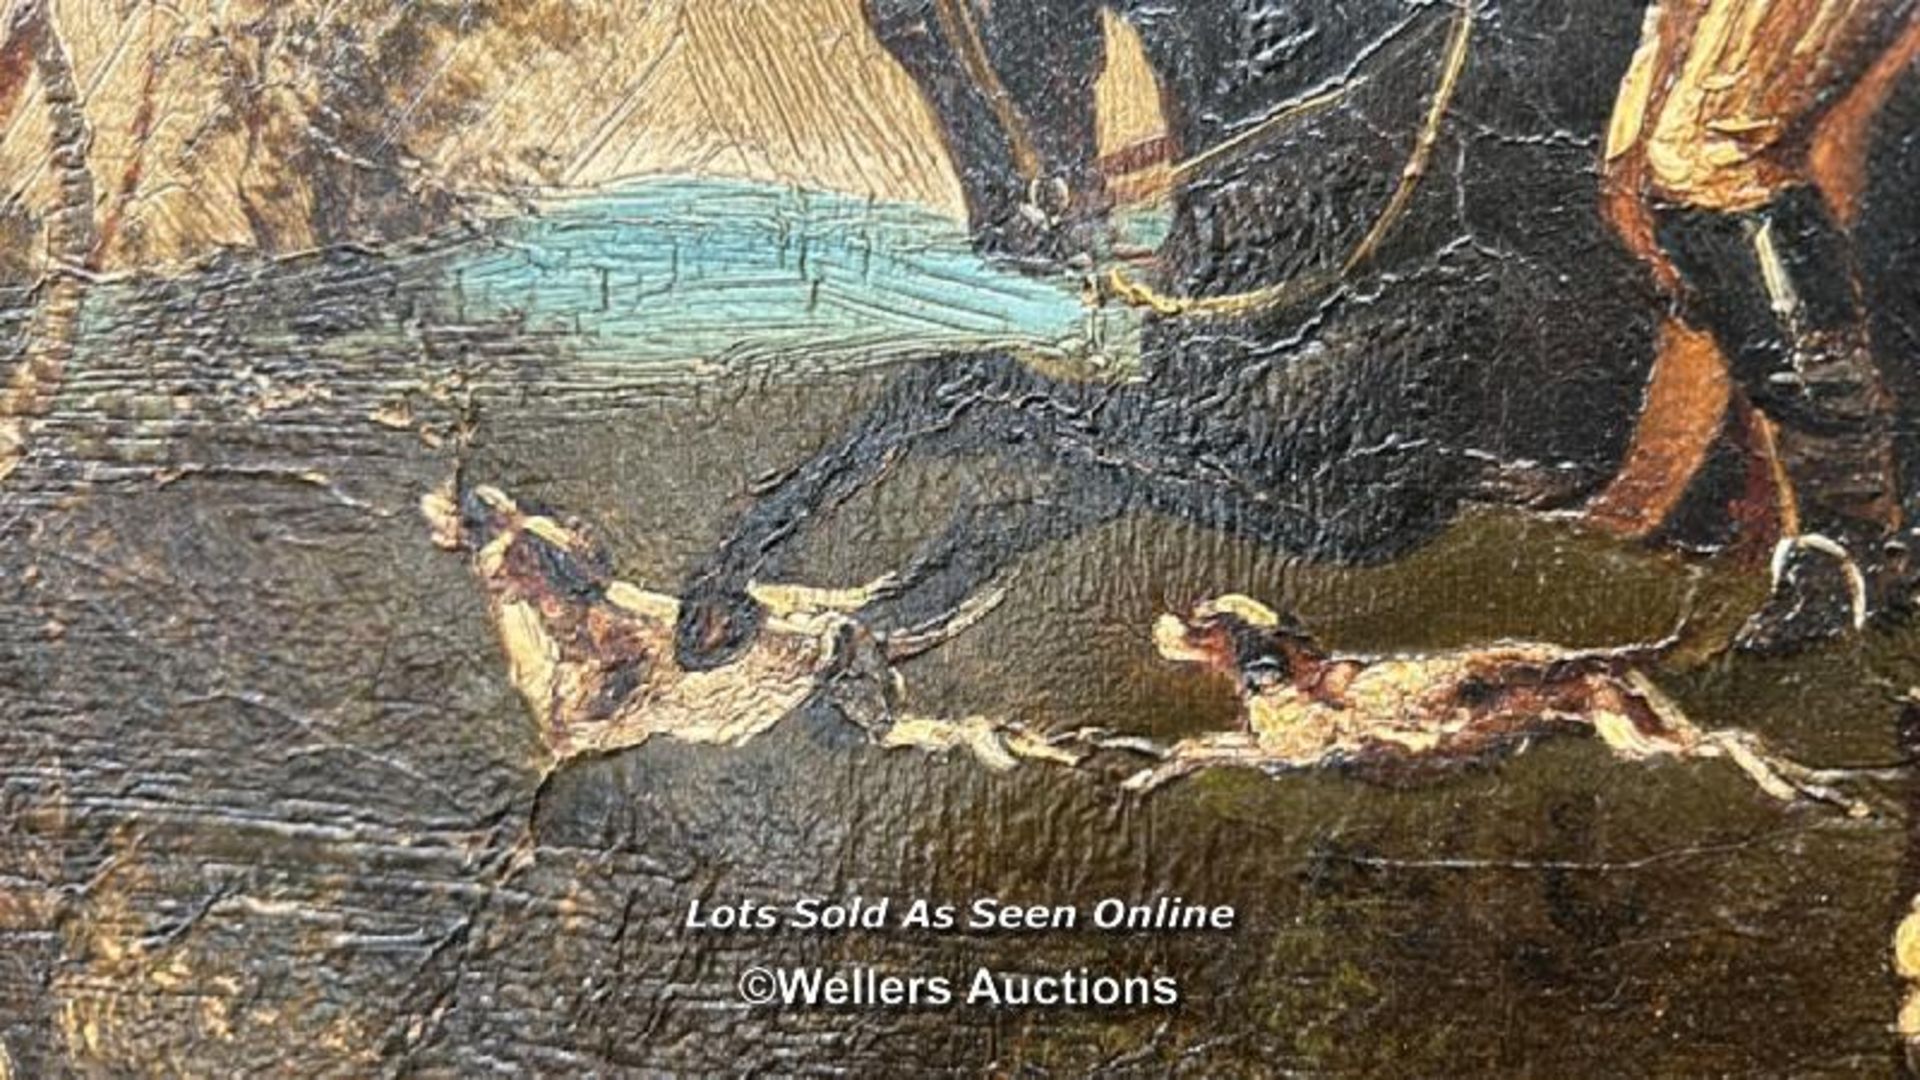 OIL PAINTING DEPICTING A HUNTING SCENE - Image 5 of 6